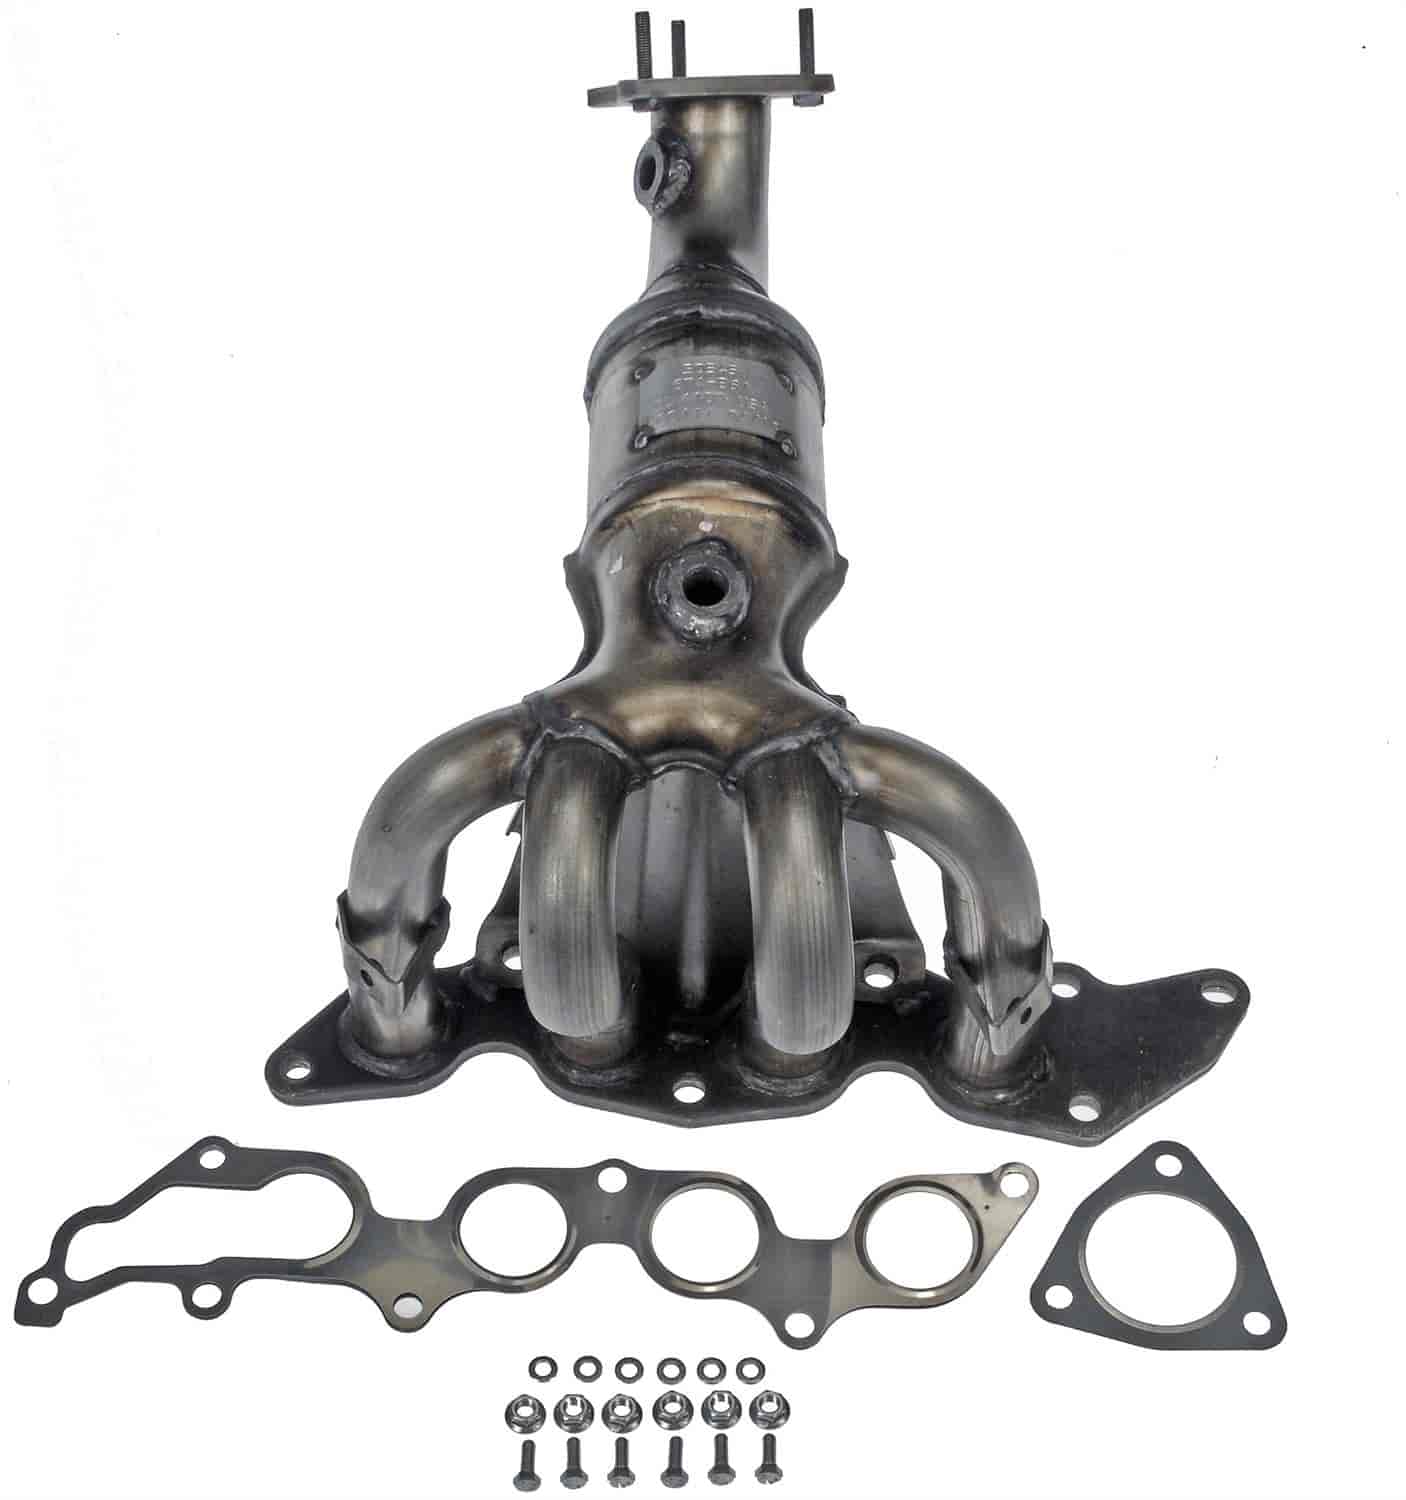 Integrated Exhaust Manifold Converter - Includes Gaskets